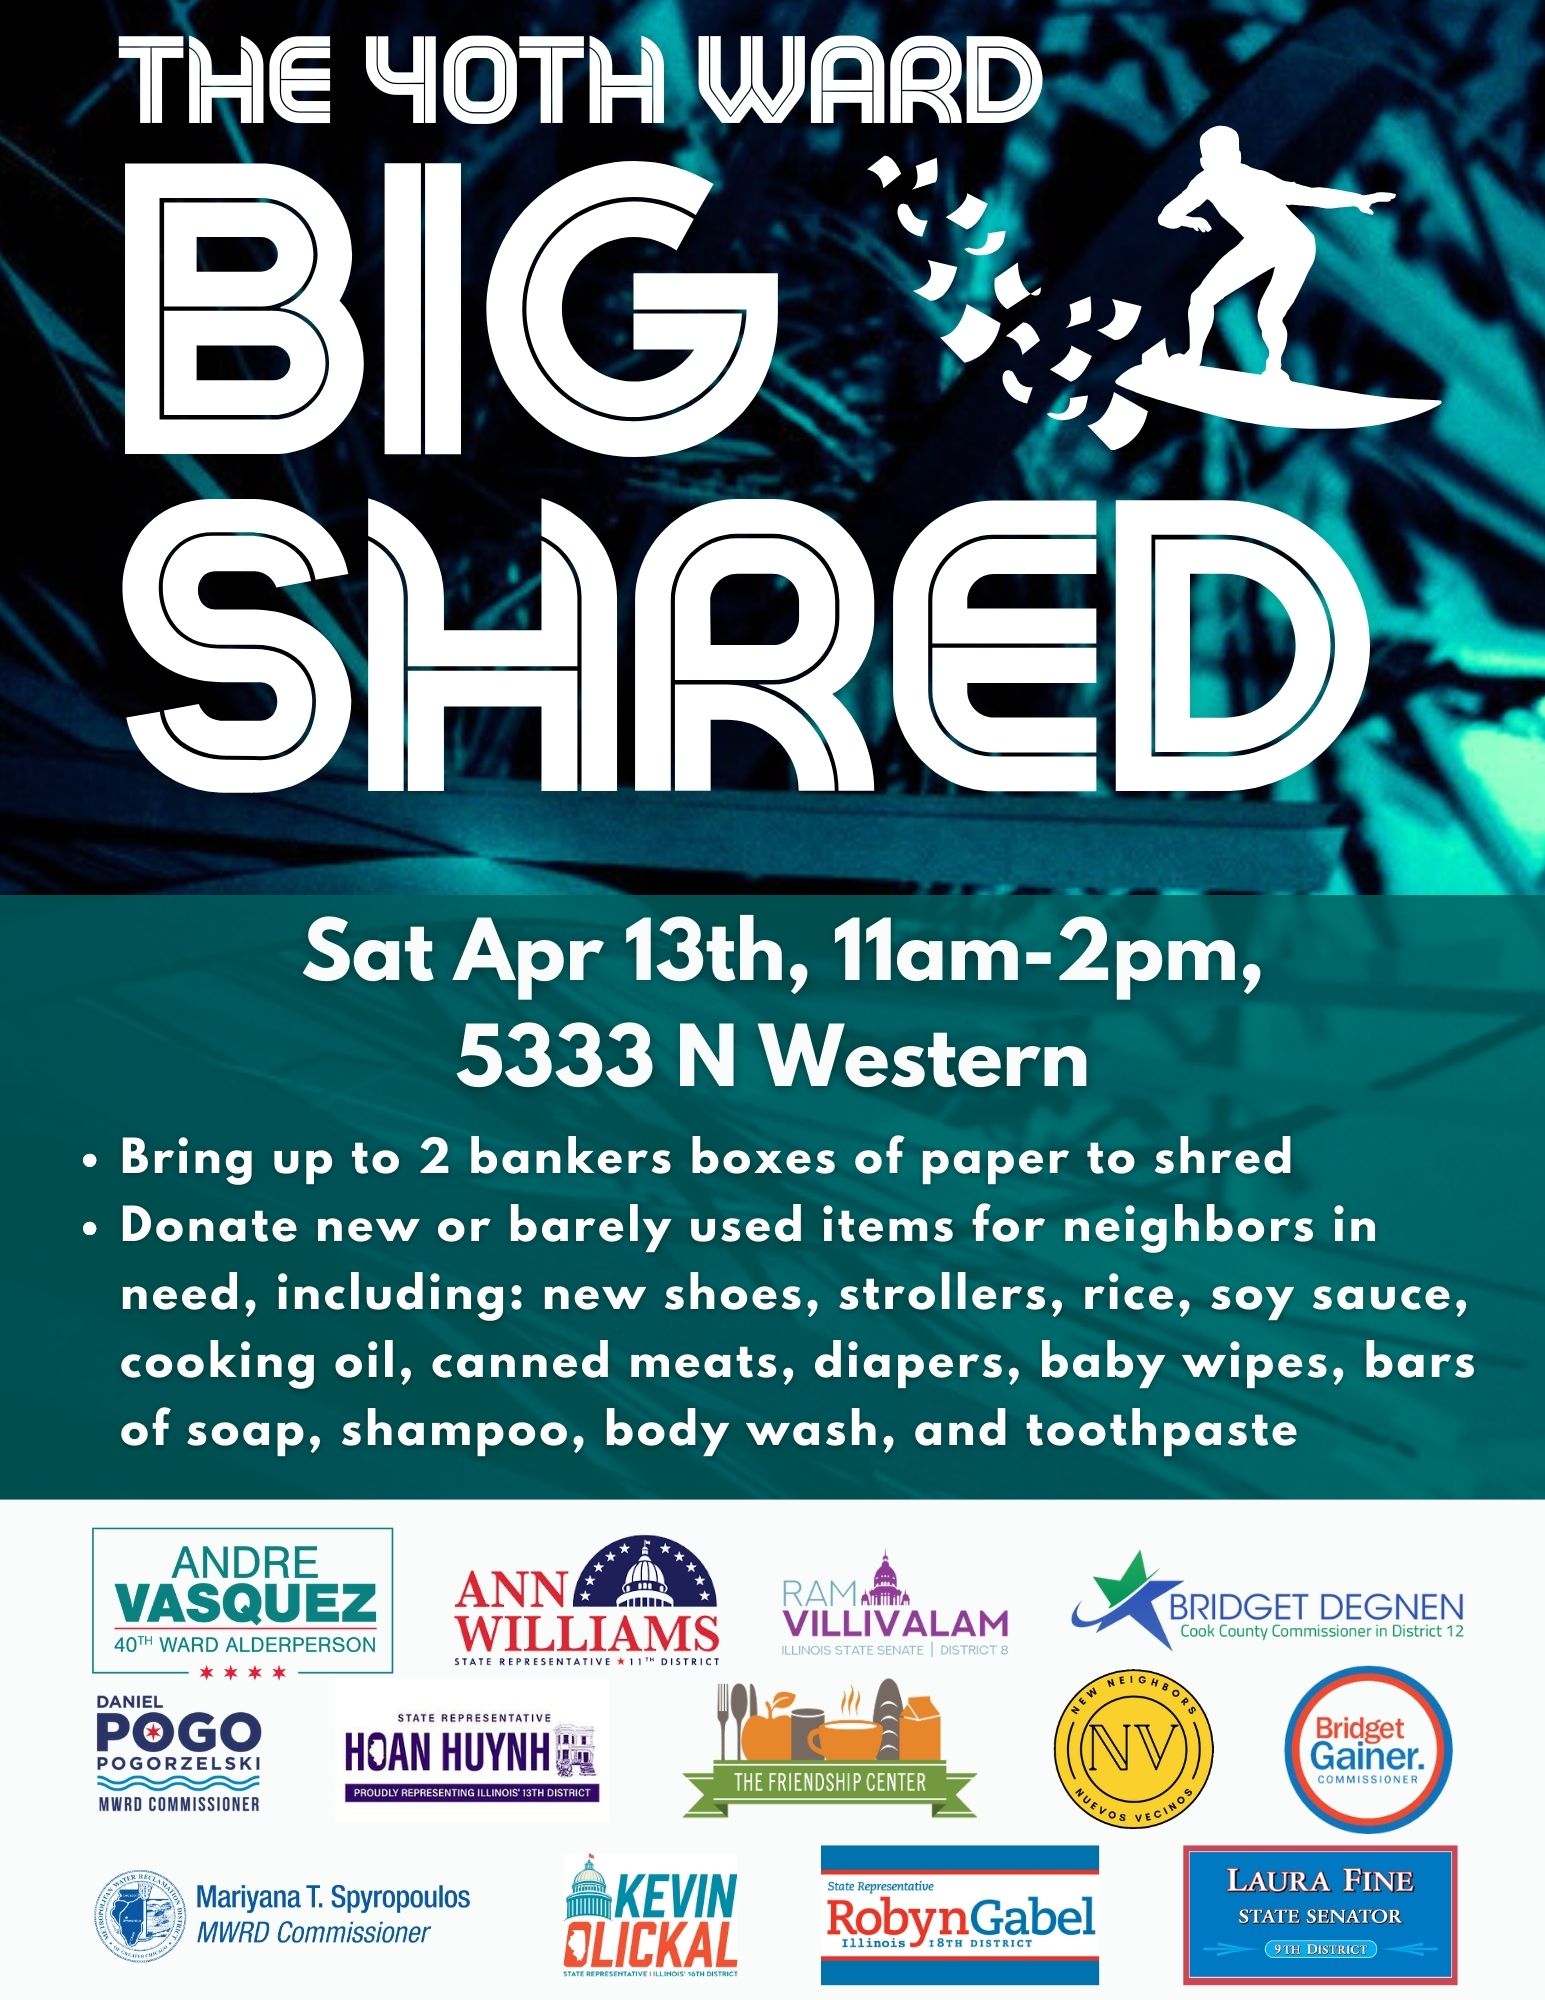 Join us for the Big Shred on April 13th!